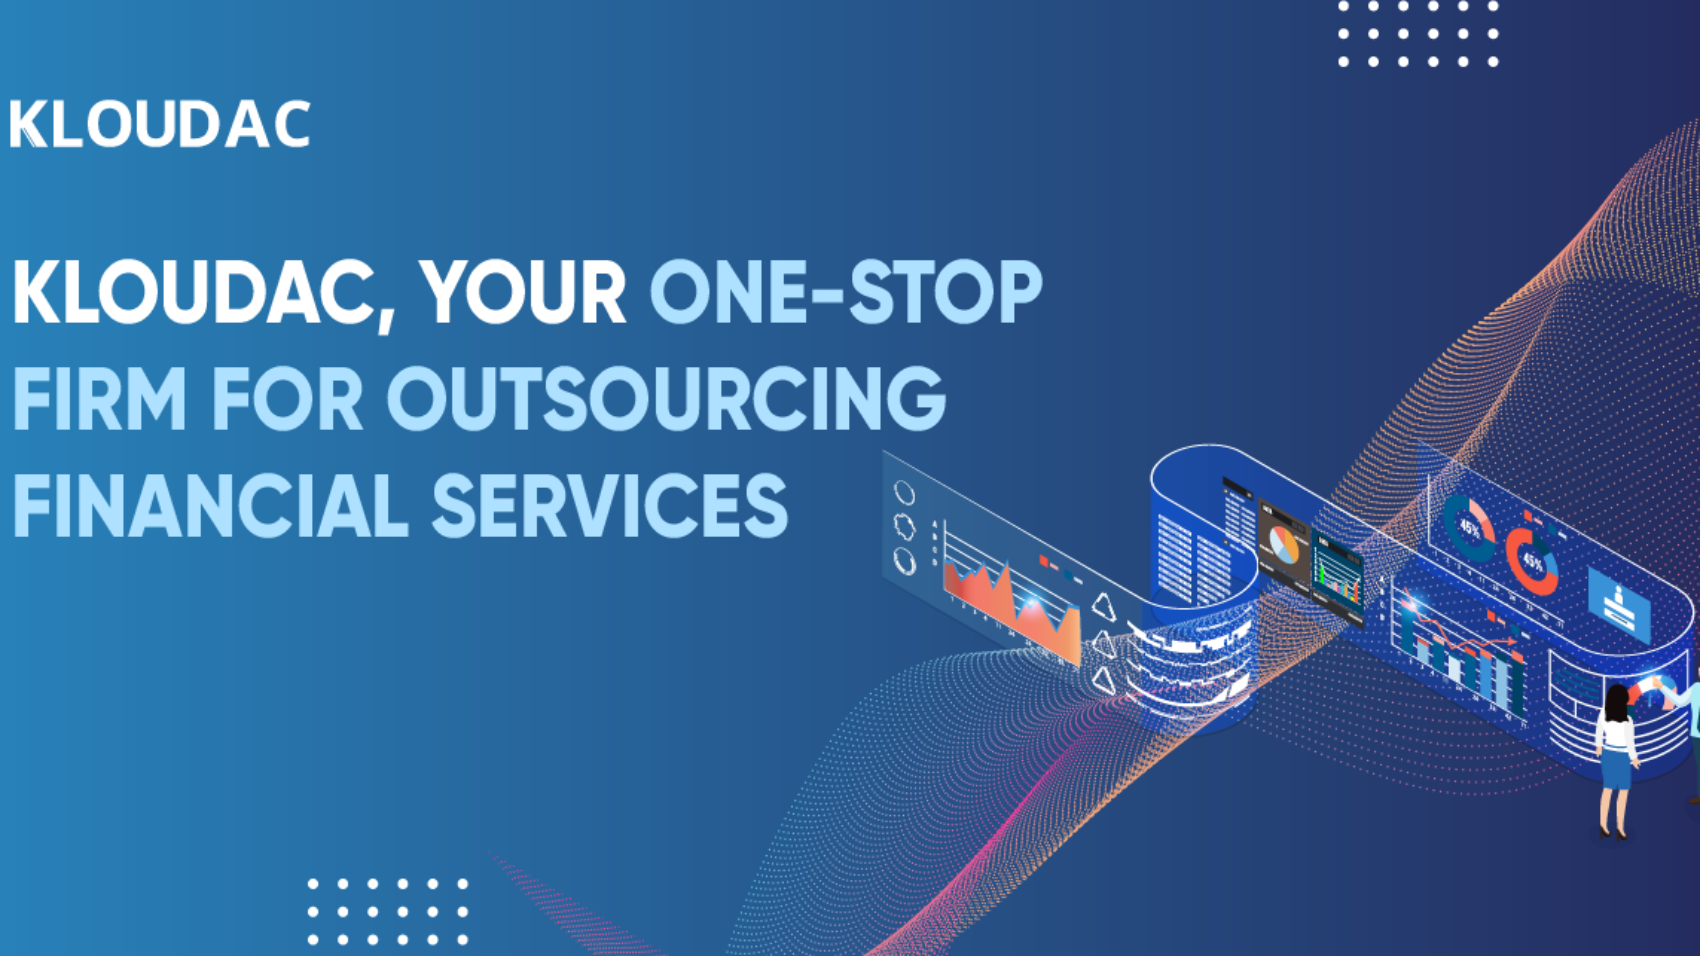 Outsourcing financial services can provide significant benefits to companies, including cost savings, improved efficiency, and access to specialized expertise